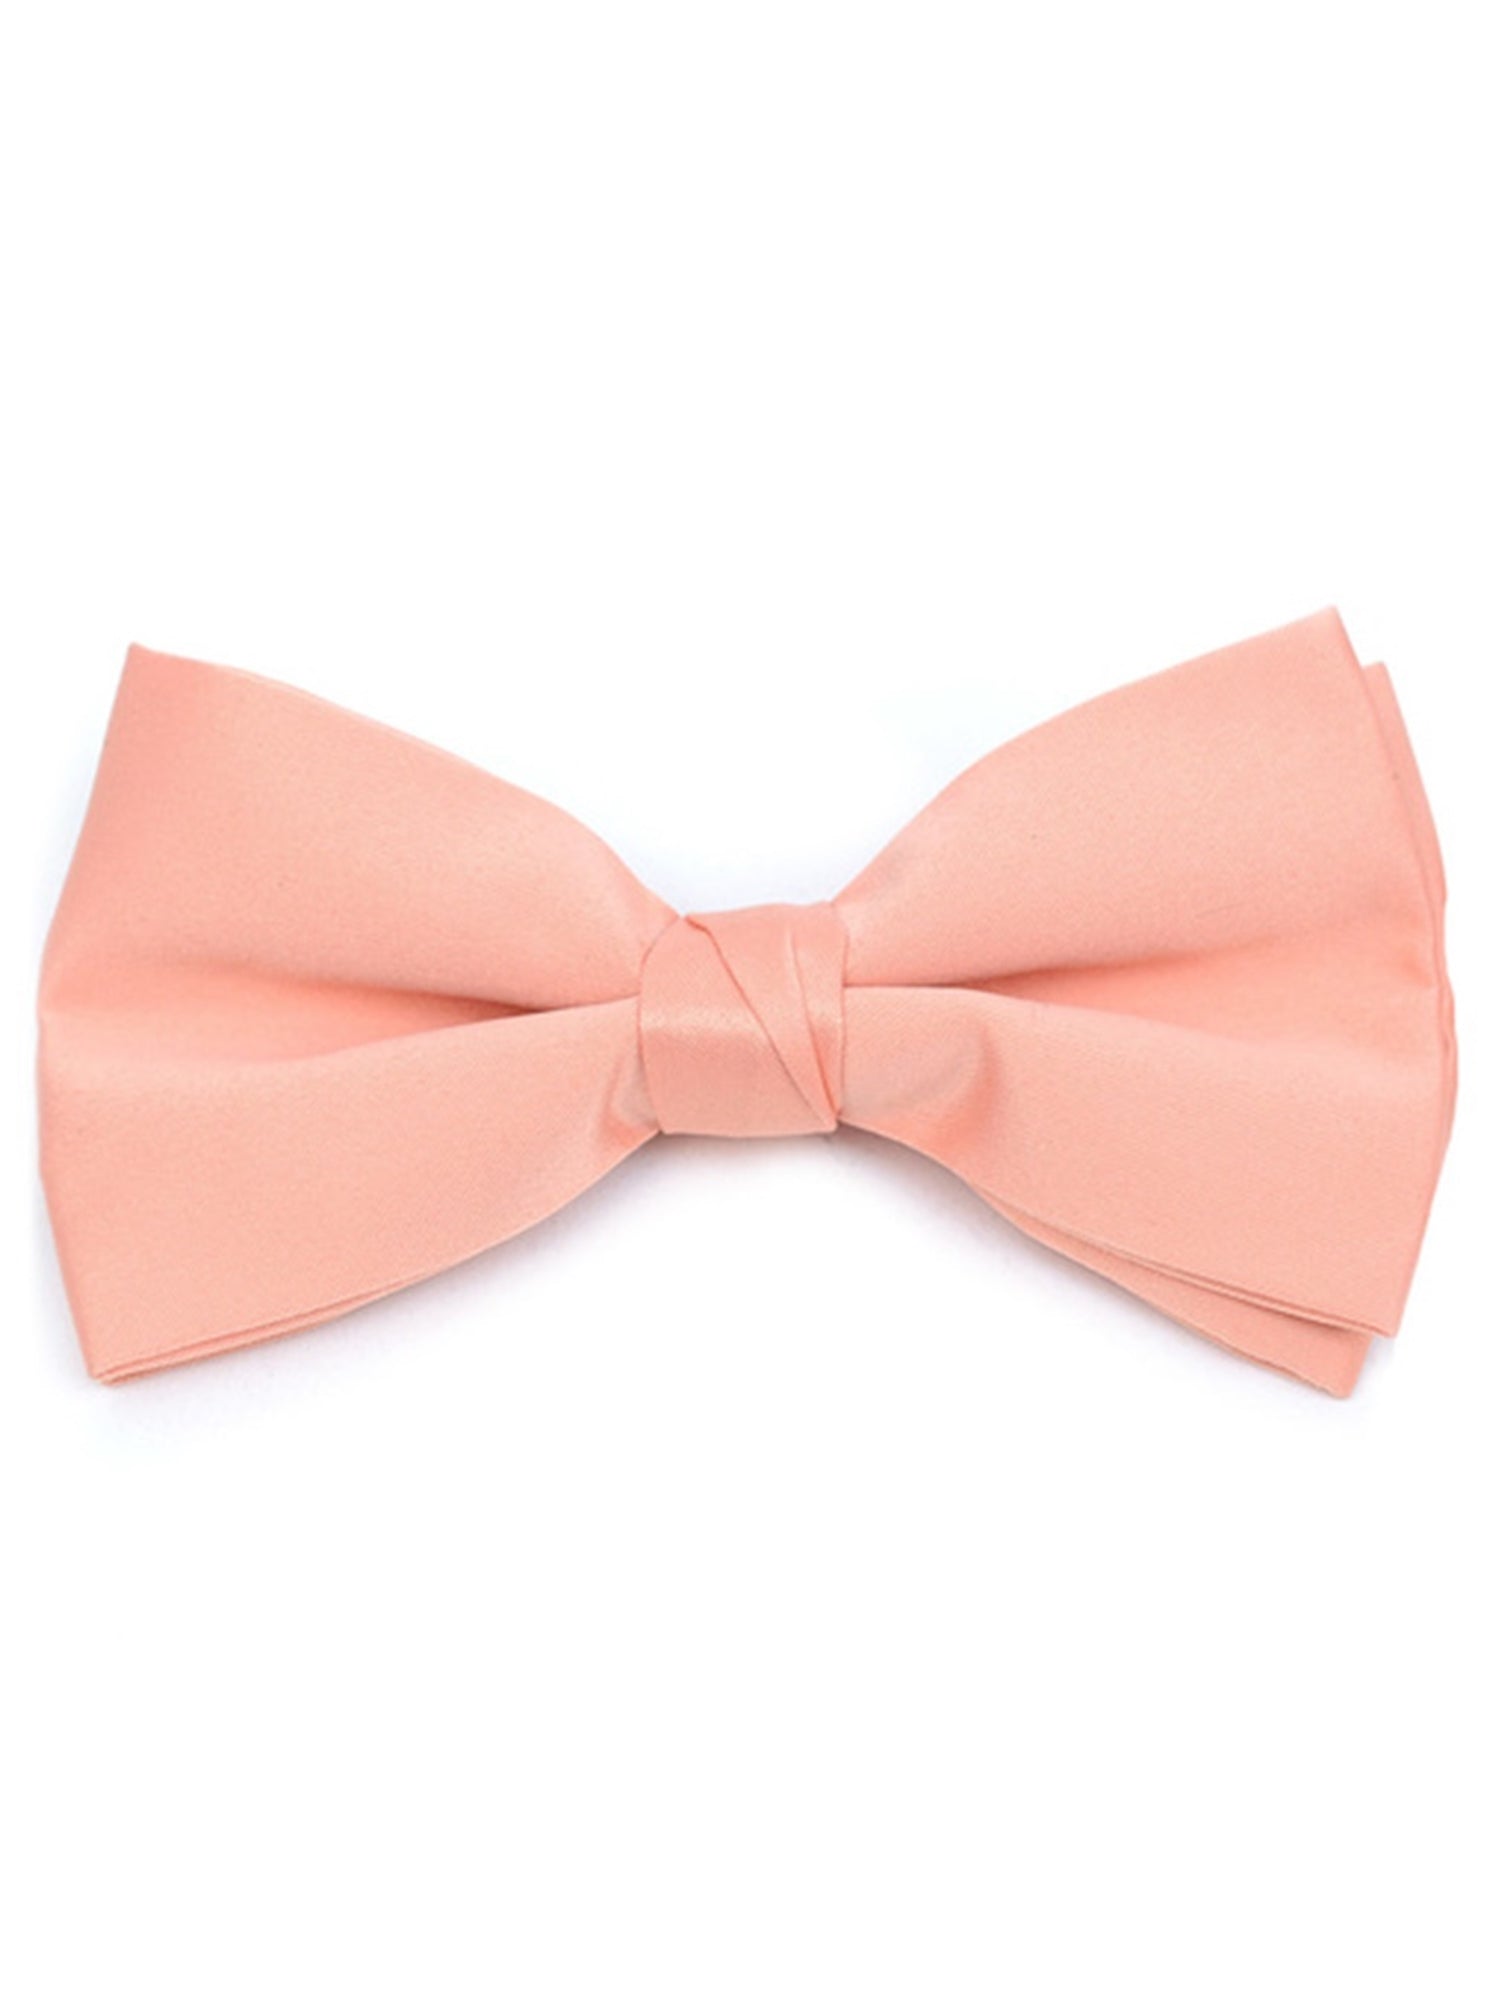 Young Boy's Pre-tied Clip On Bow Tie - Formal Tuxedo Solid Color Boy's Solid Color Bow Tie TheDapperTie Corol One Size 